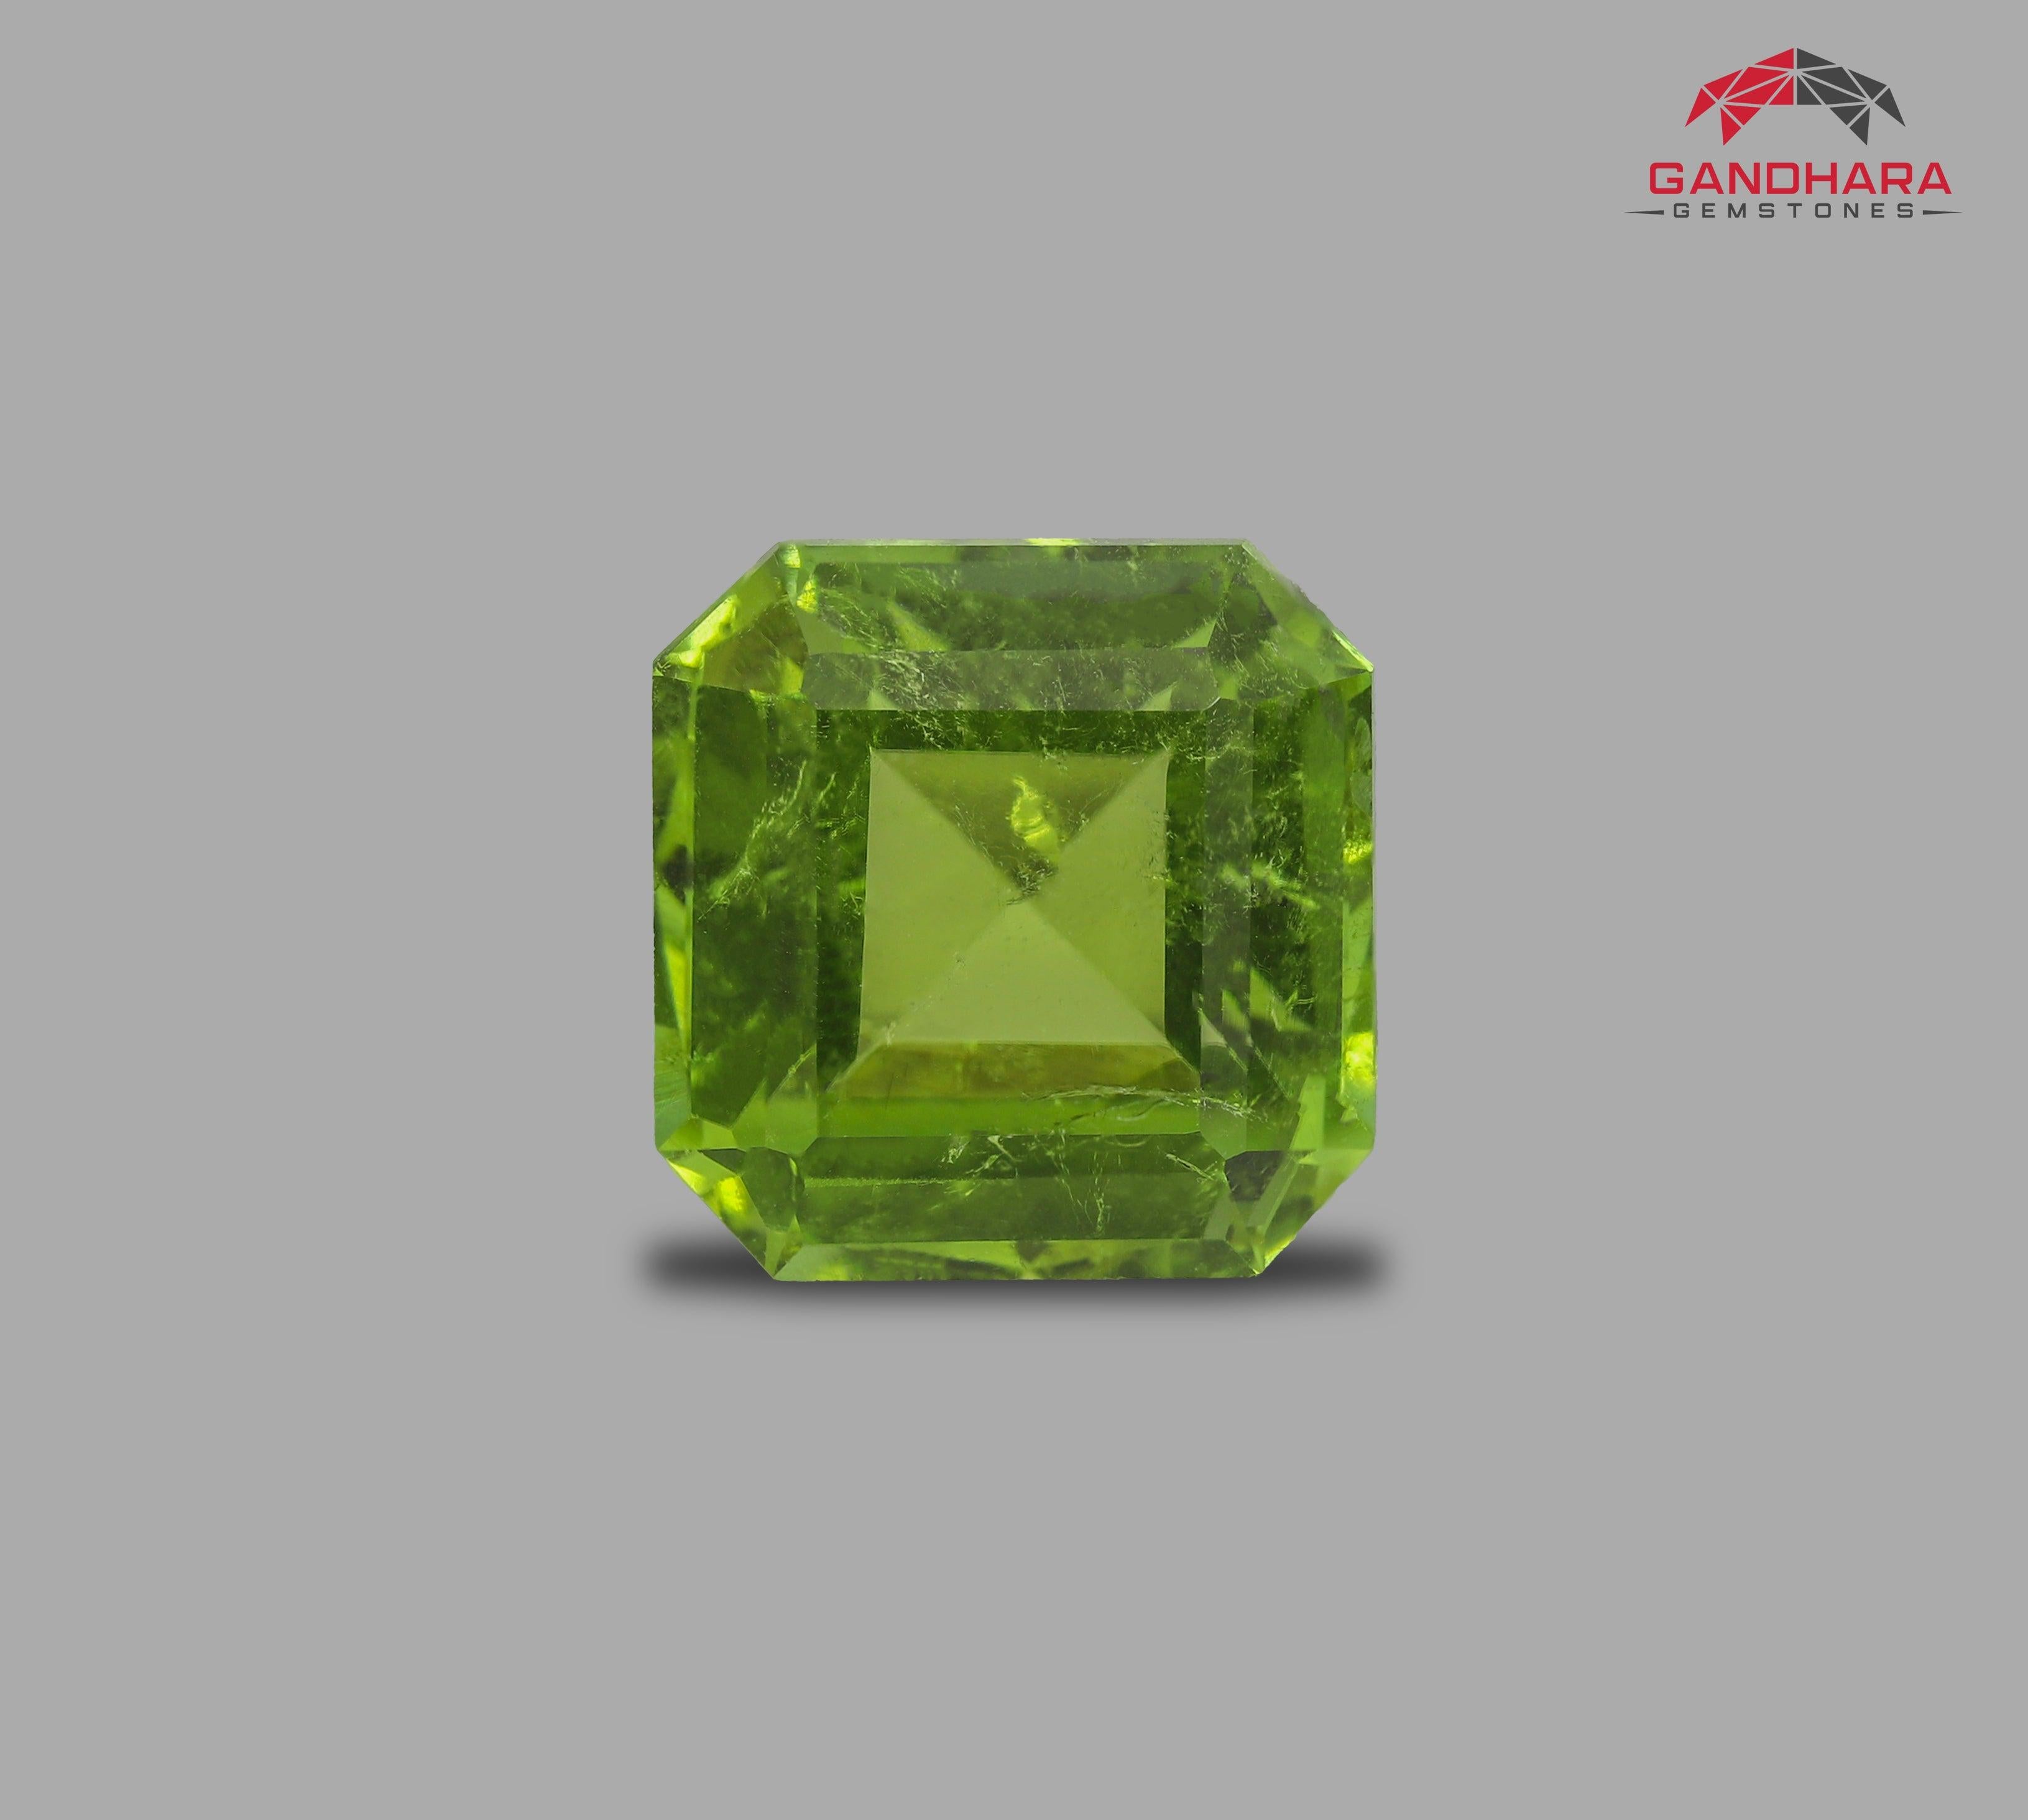 Lovely Color Apple Green Tourmaline, available for sale at wholesale price, natural high-quality, 4.605 carats Loose certified tourmaline gemstone from Congo.

Product Information:
GEMSTONE TYPE	Lovely Color Apple Green Tourmaline
WEIGHT	4.605